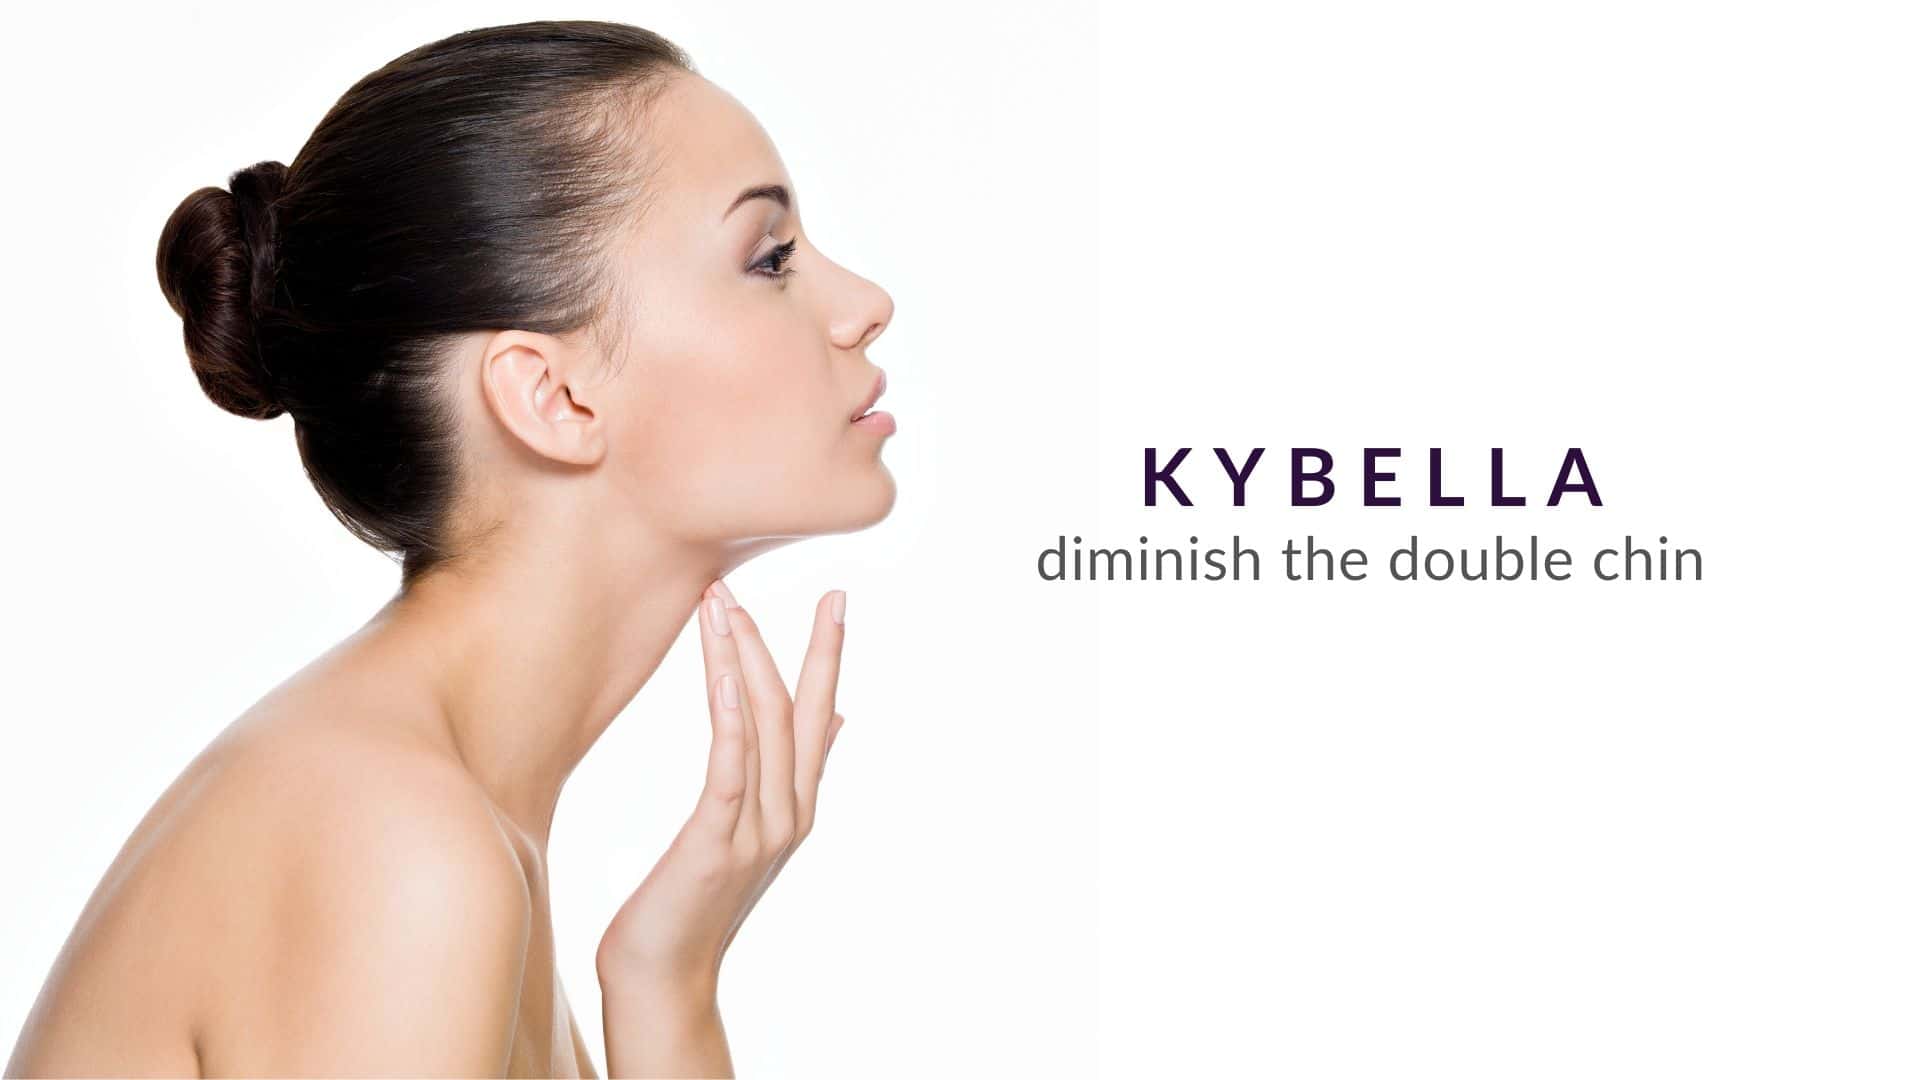 Woman touching her defined chin after kybella treatment at advanced rejuvenation centers.